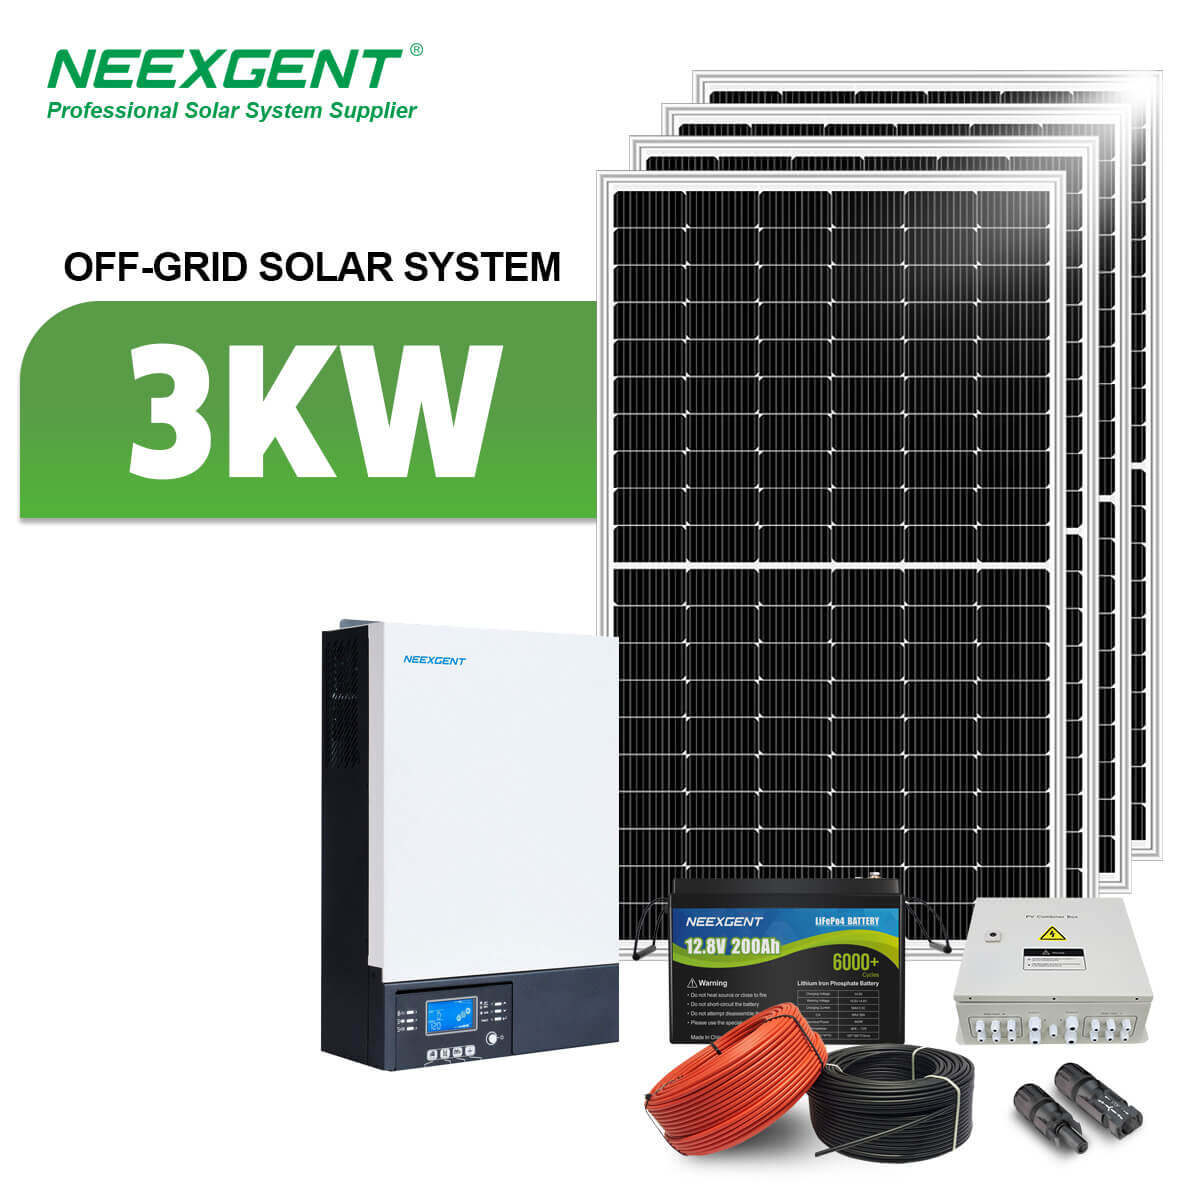 Neexgent 3kw Off Grid Solar Kit Home Use Solar System For Power Generation